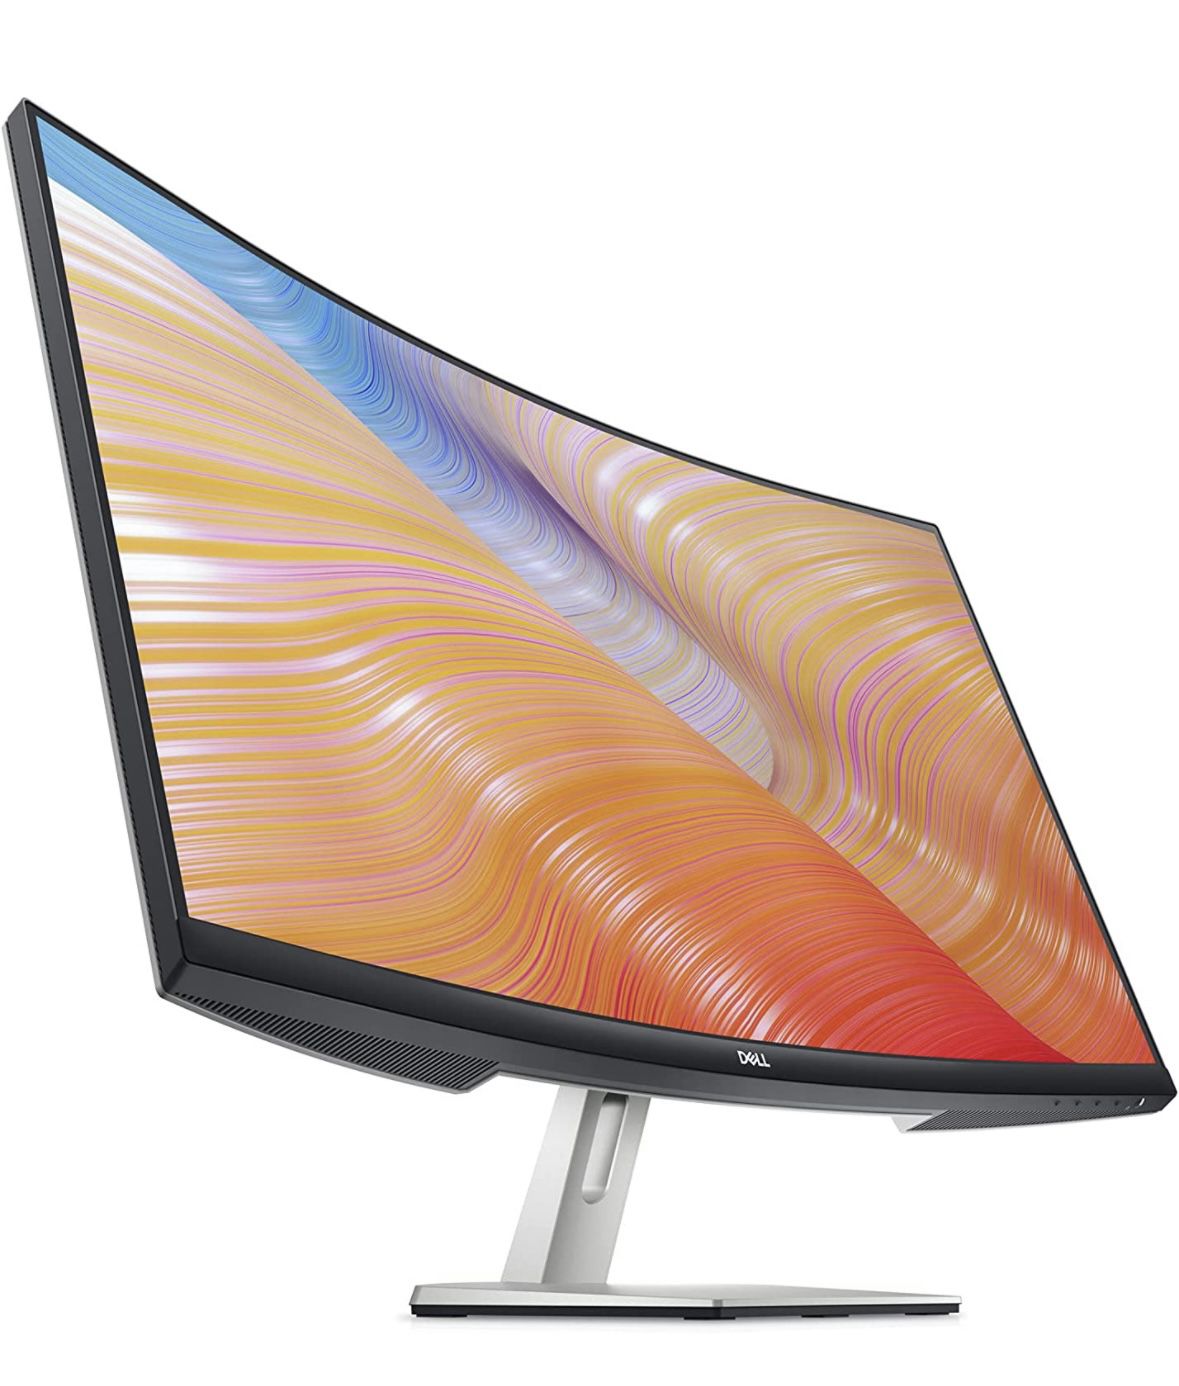 Dell 32" Curved Monitor with Box (Model: S3222HN)